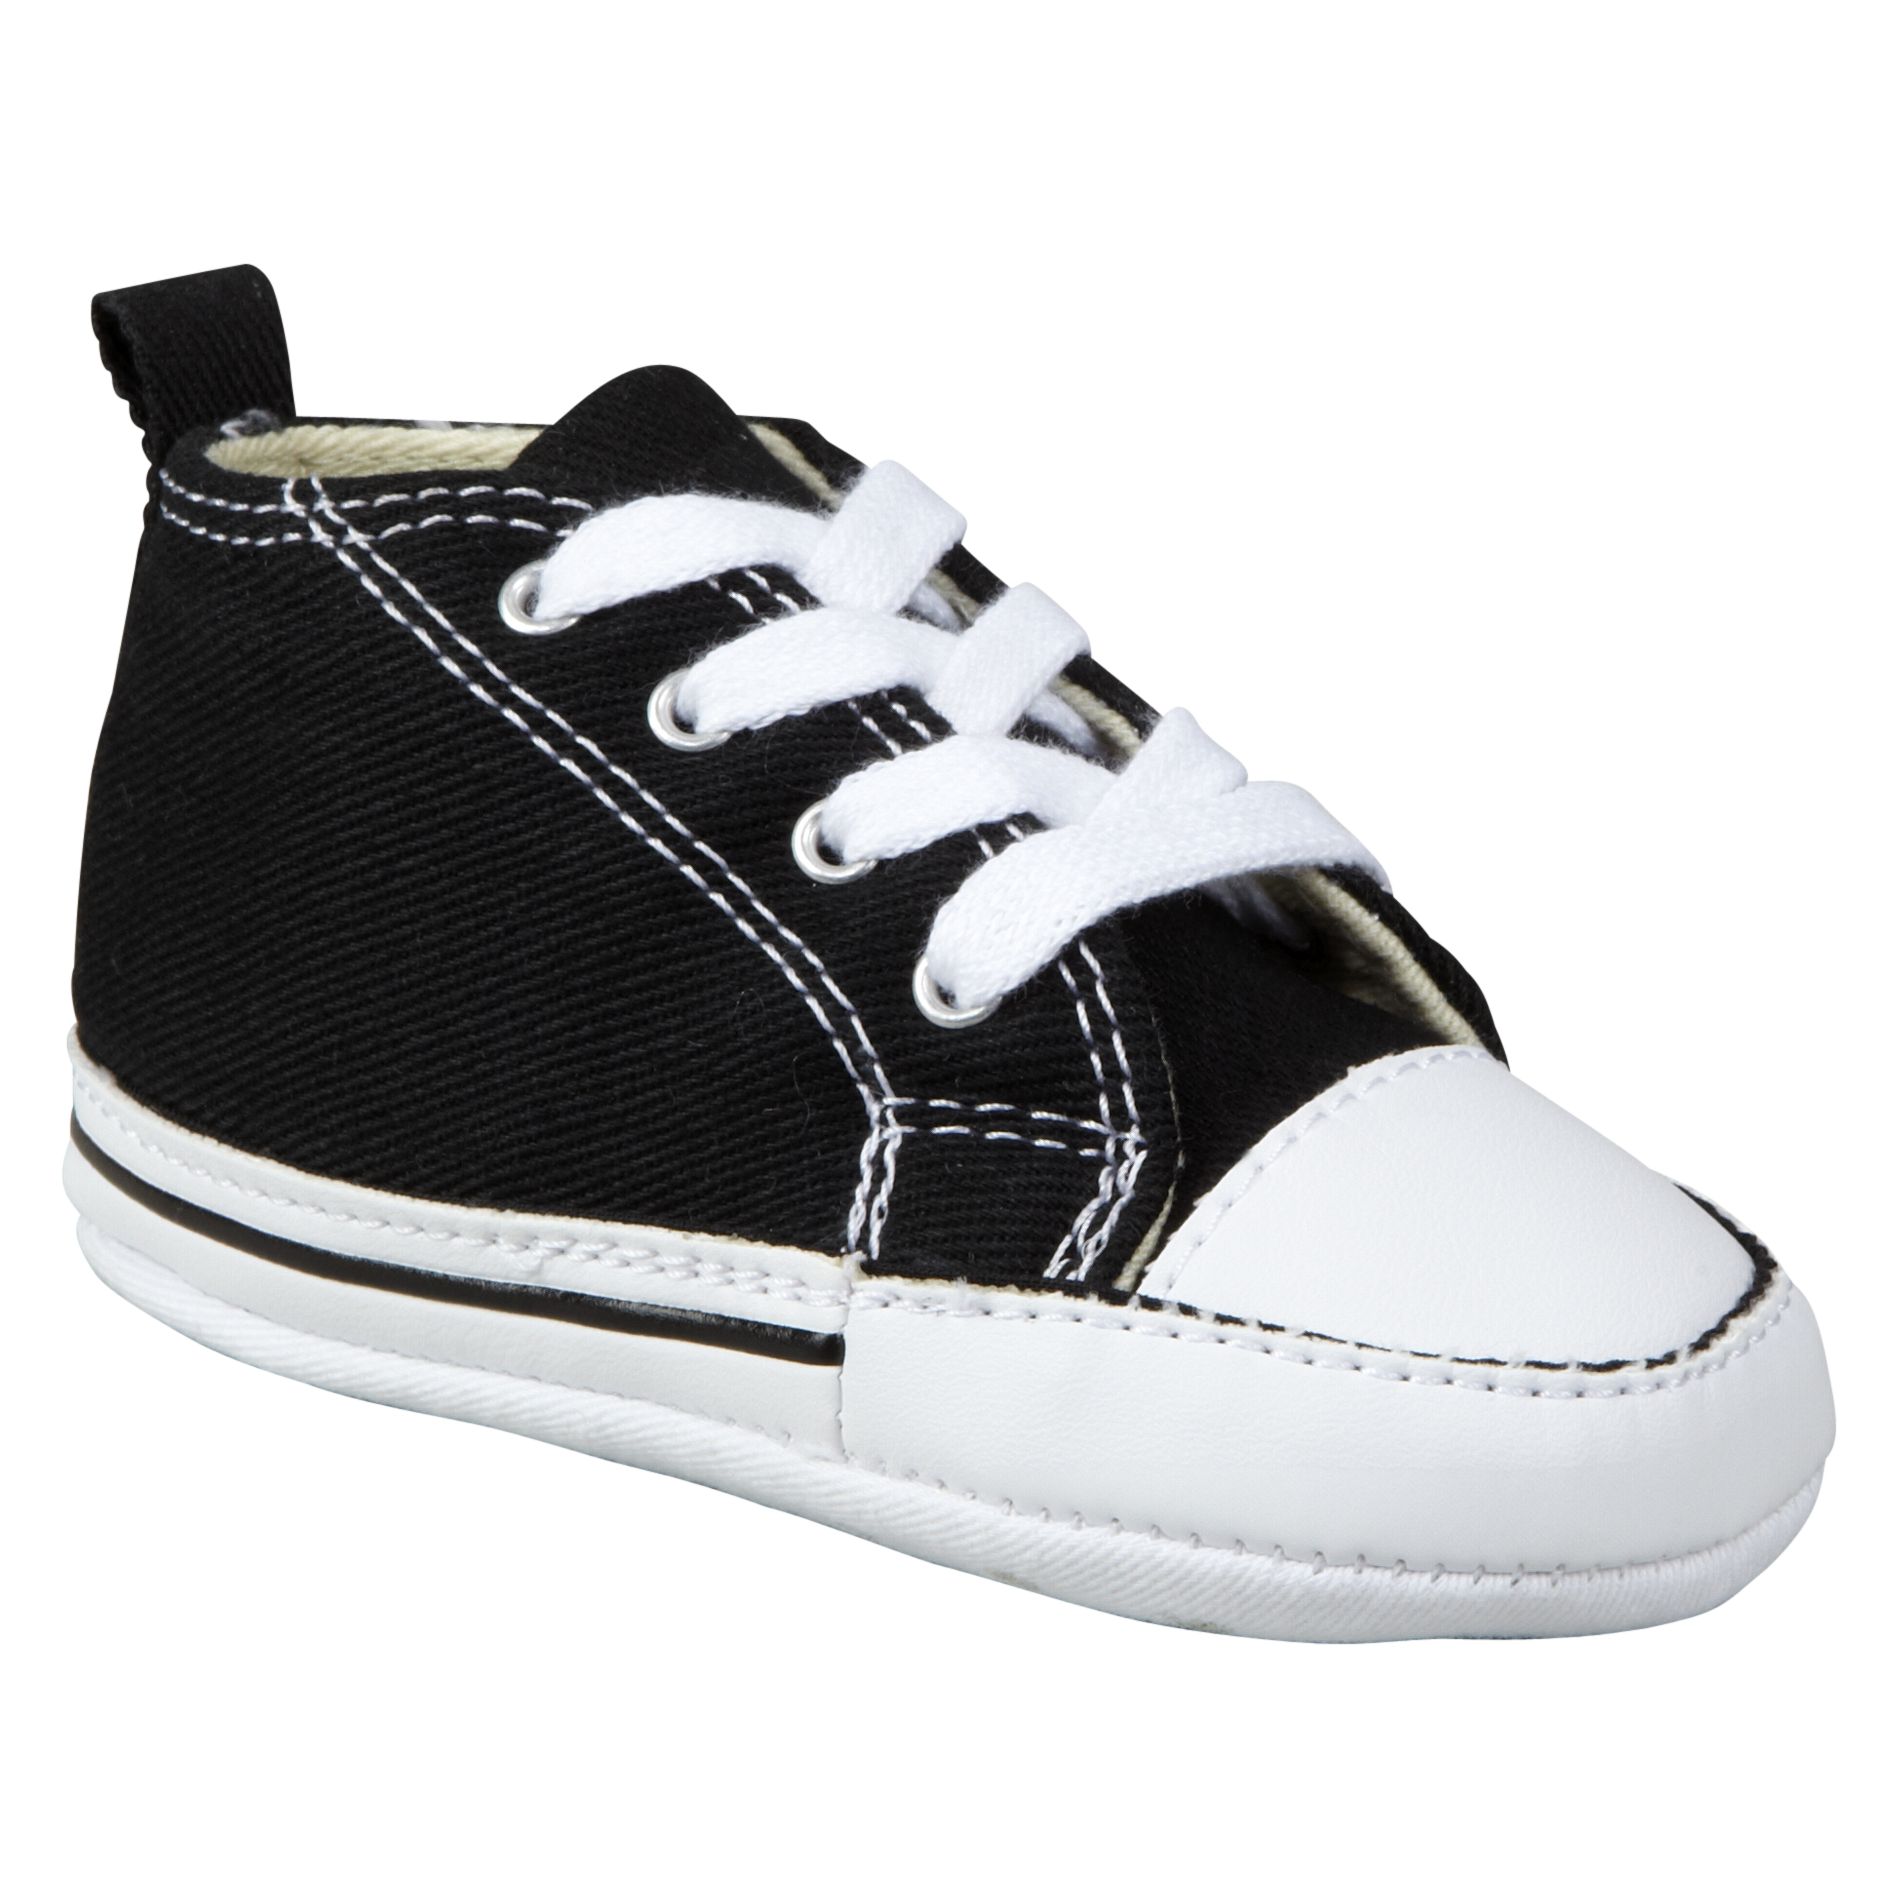 Baby Chuck Taylor First Star Athletic Shoe - Black/White